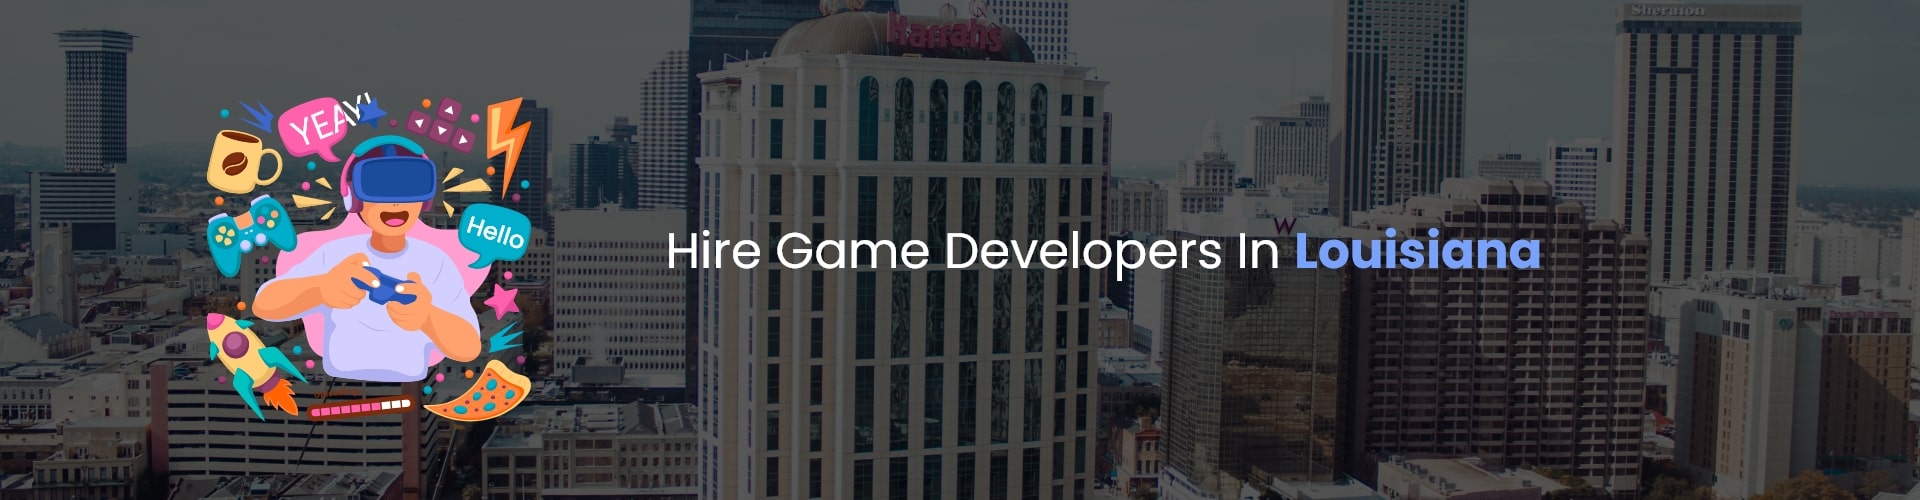 hire game developers in louisiana